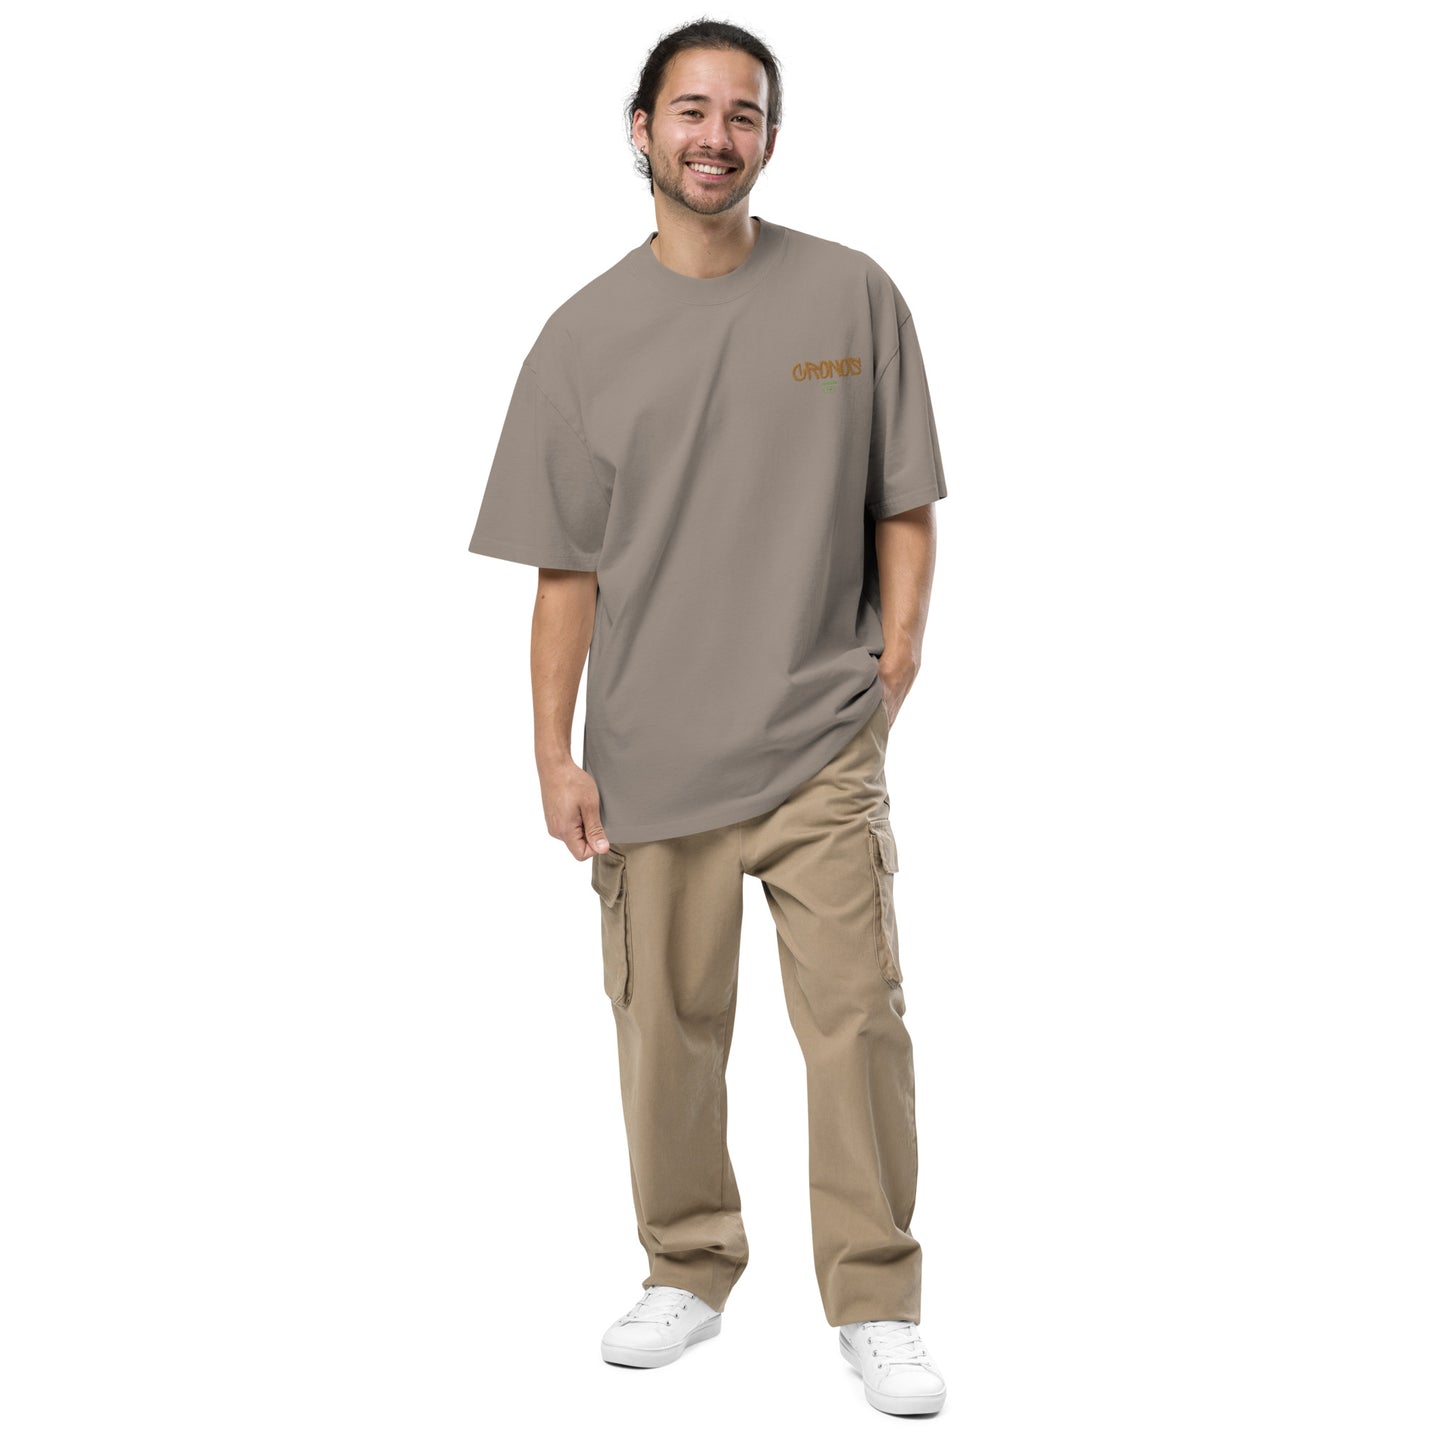 Oversized faded t-shirt